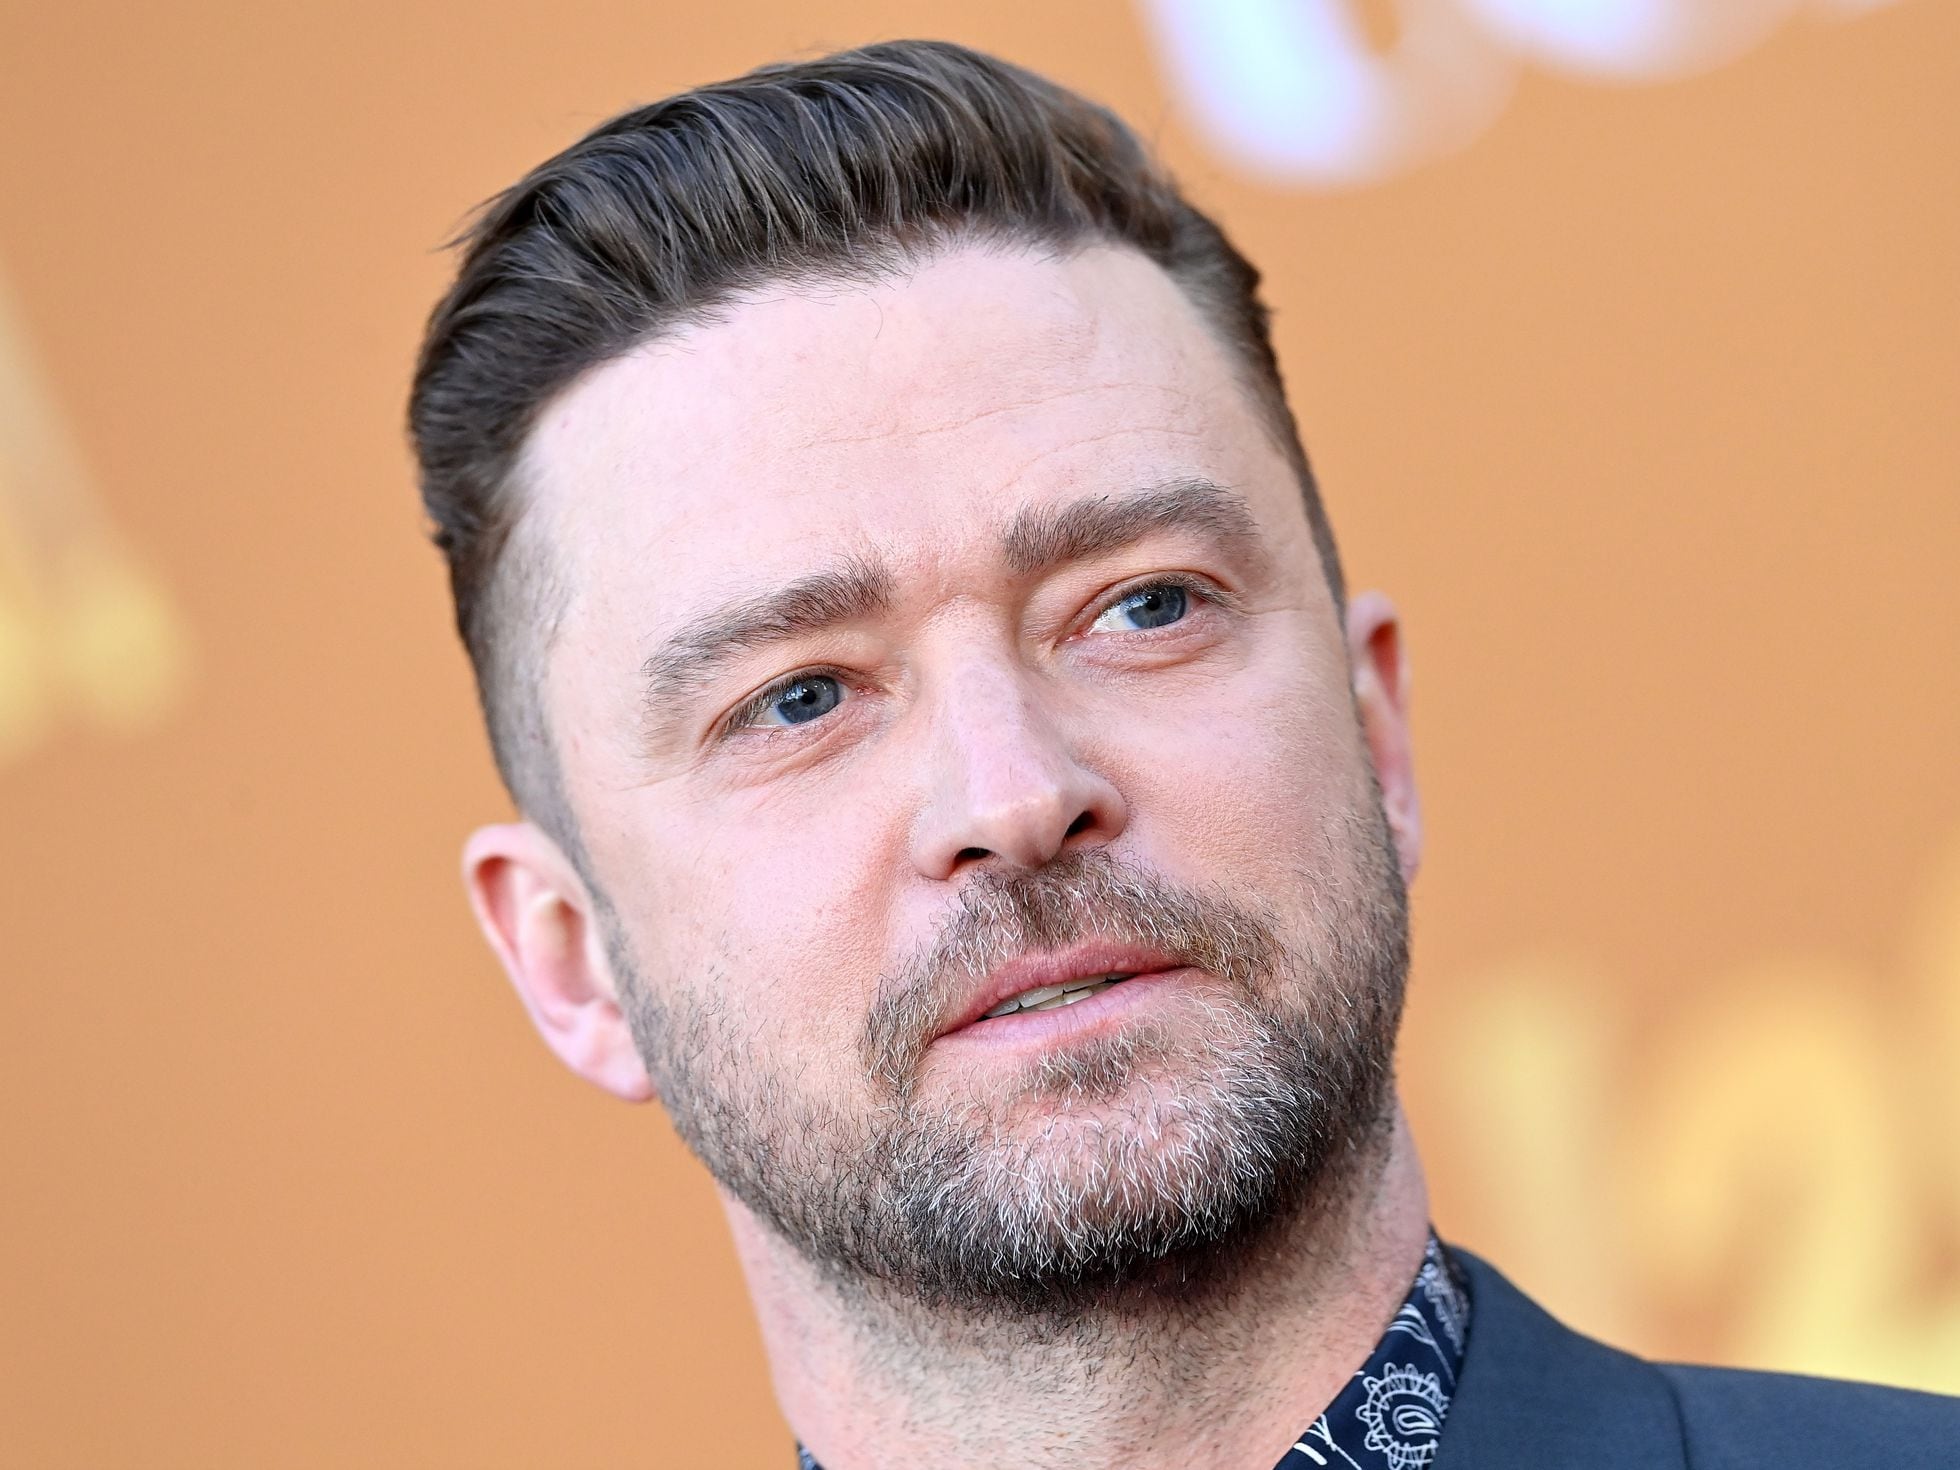 Justified: Generation Z doesn't like Justin Timberlake anymore: The 'new king of pop' apologized too late | Culture | EL PAÍS English Edition